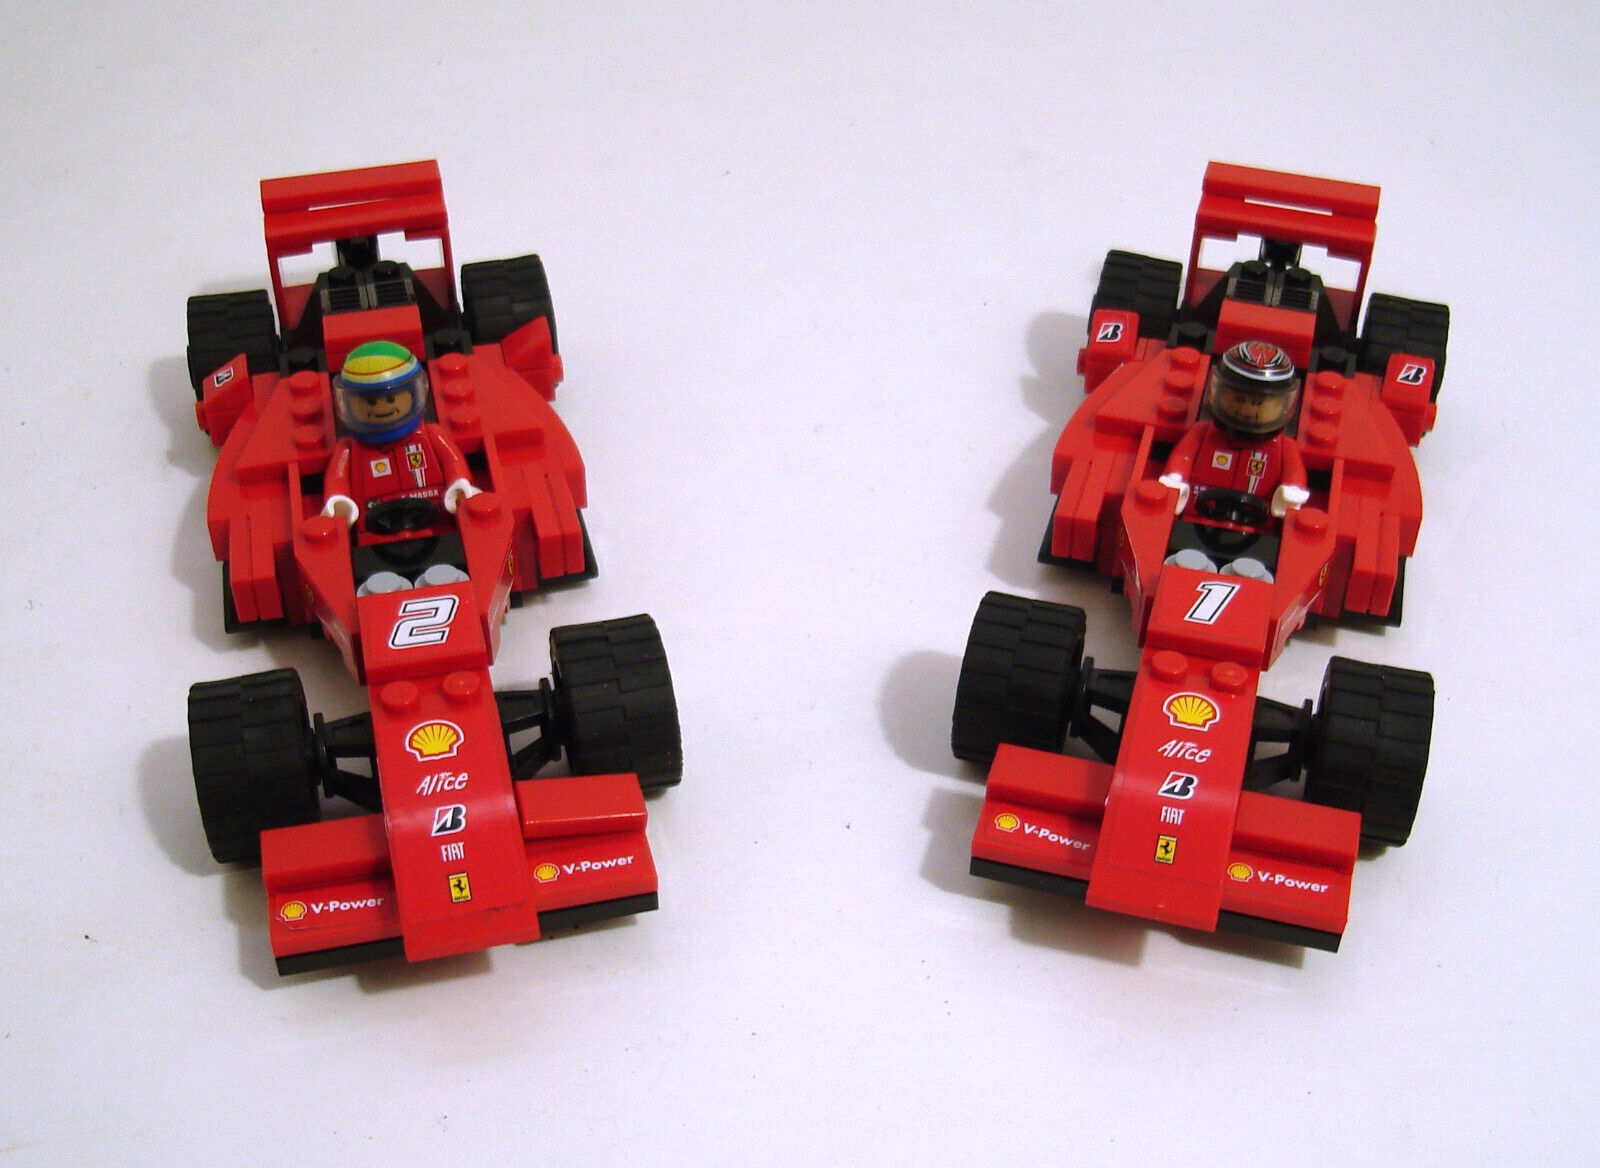 Lego 2 Ferrarri Formula One Race Cars With Drivers From Set 8168